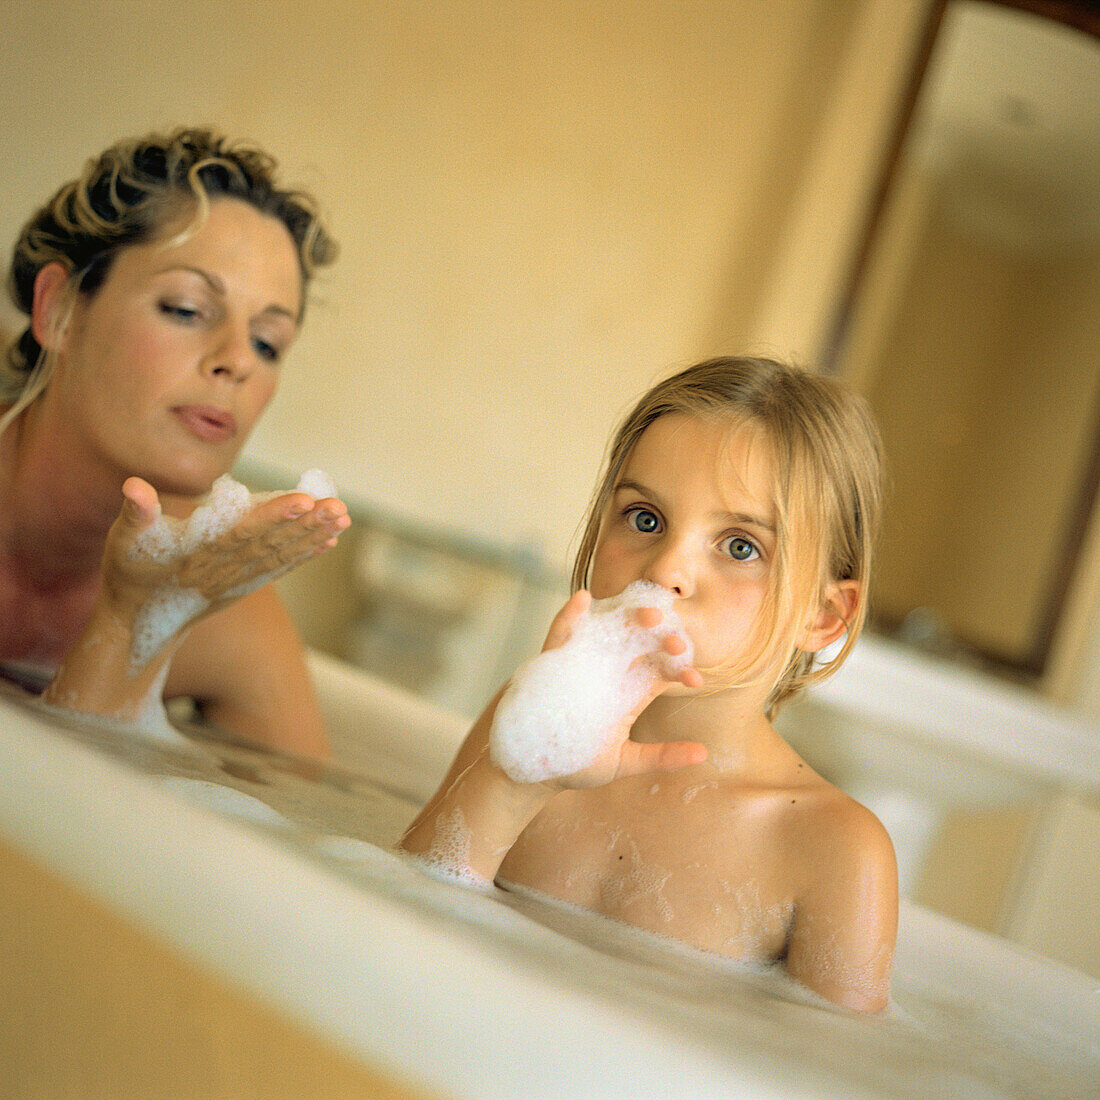 Woman and girl in bubble bath